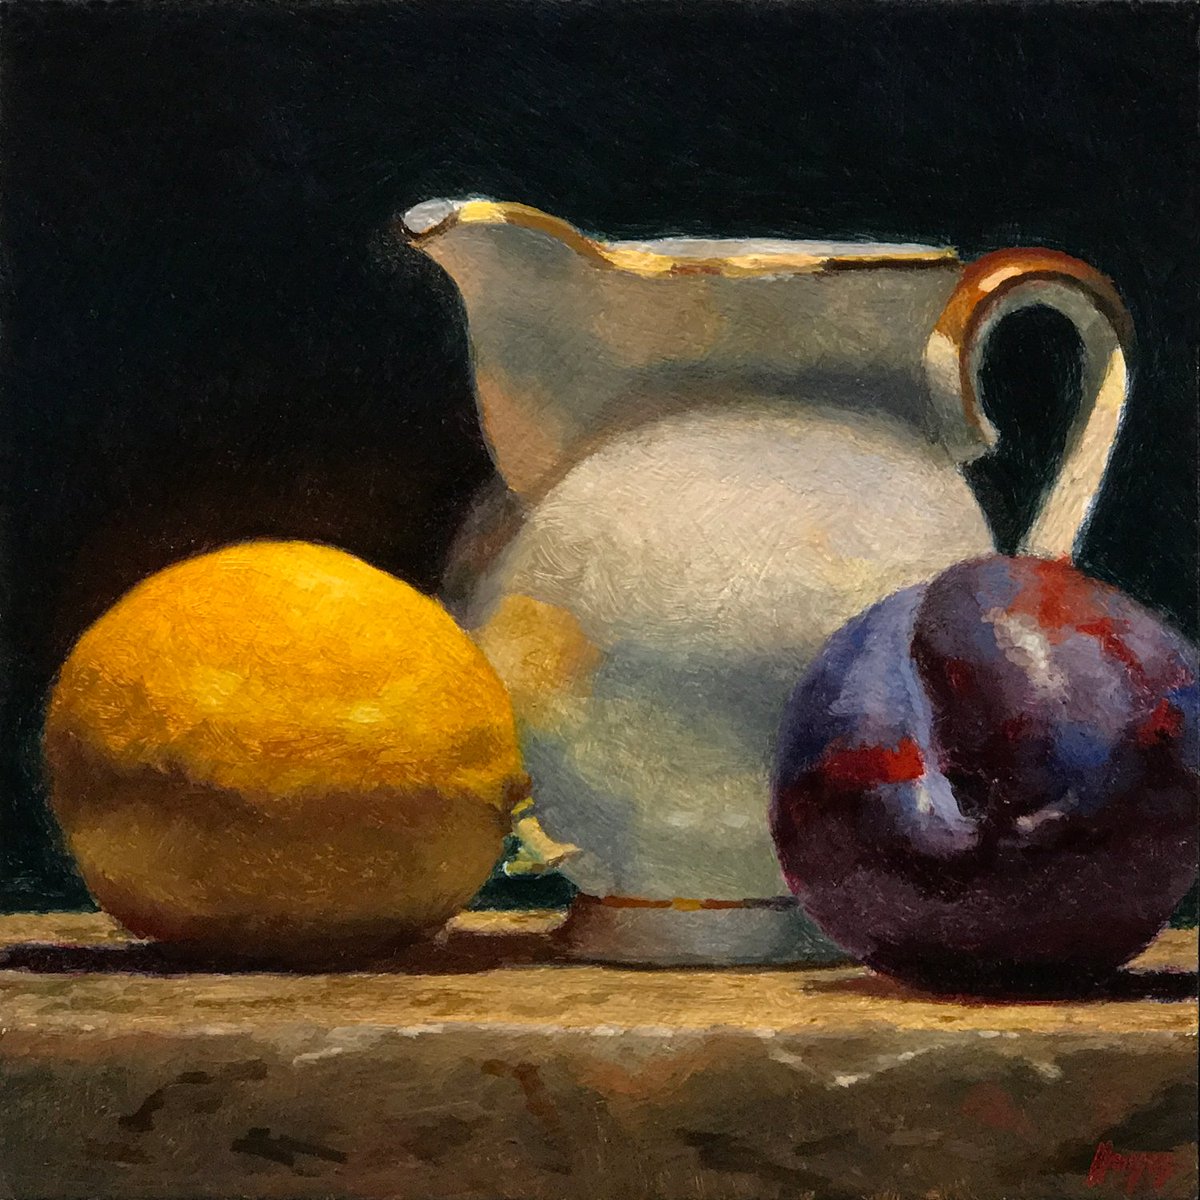 Study in softer light. For your enjoyment, this is 'Lemon, Creamer, Plum', oil on panel, 5x5 inches / 12x12 cm (sold). #art #painting #stilllife